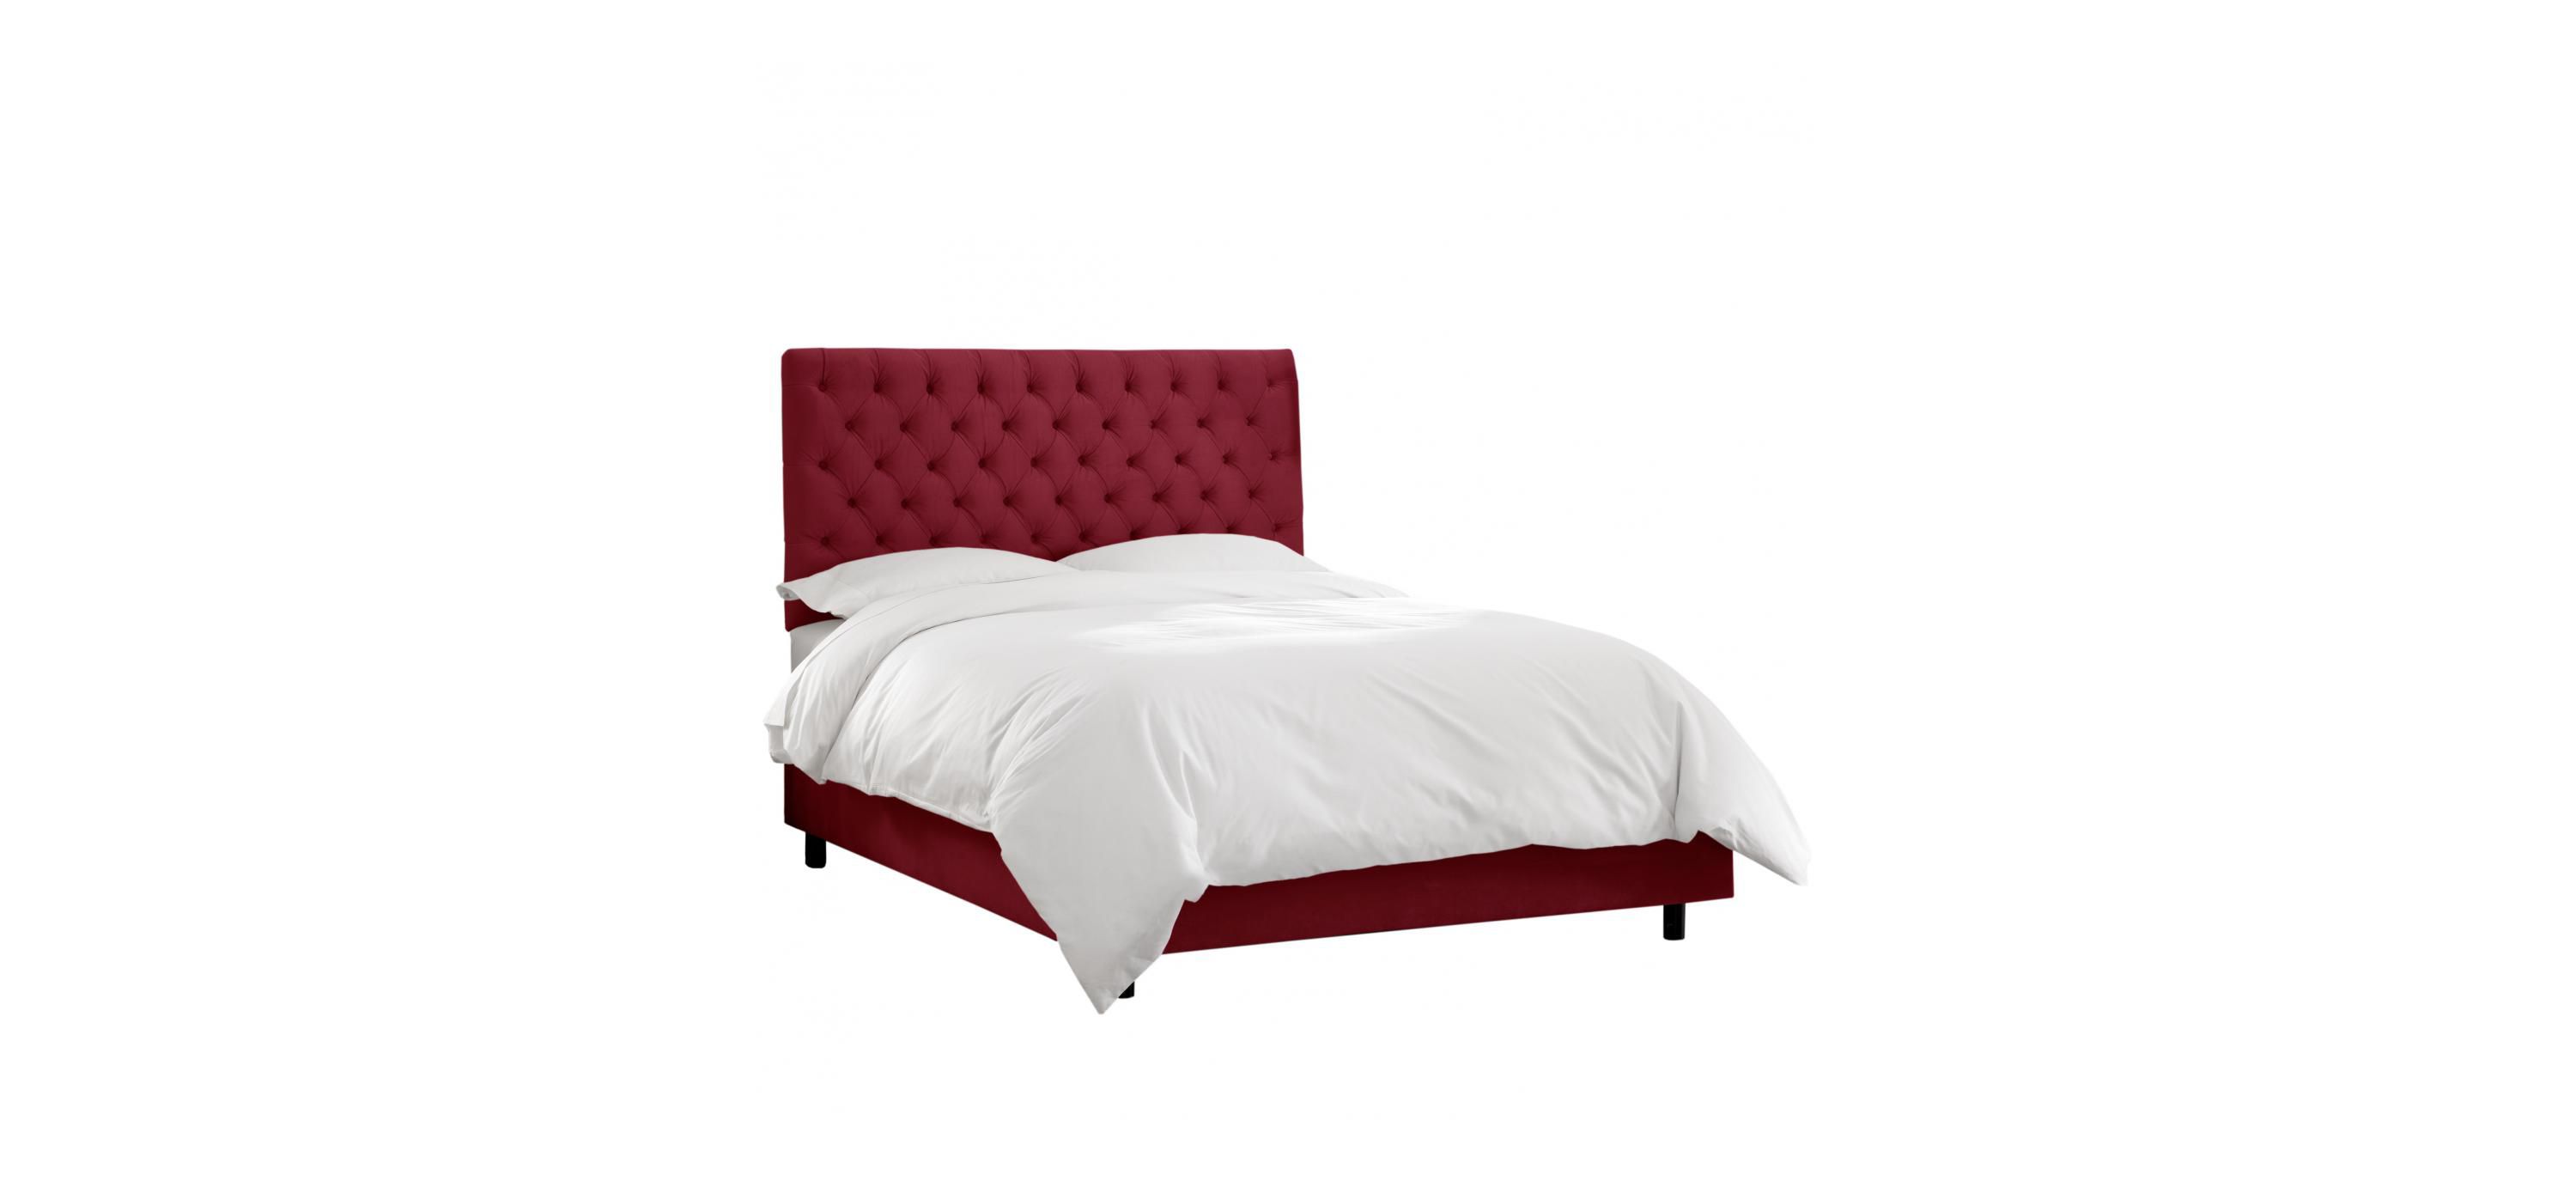 Queensbury Tufted Bed